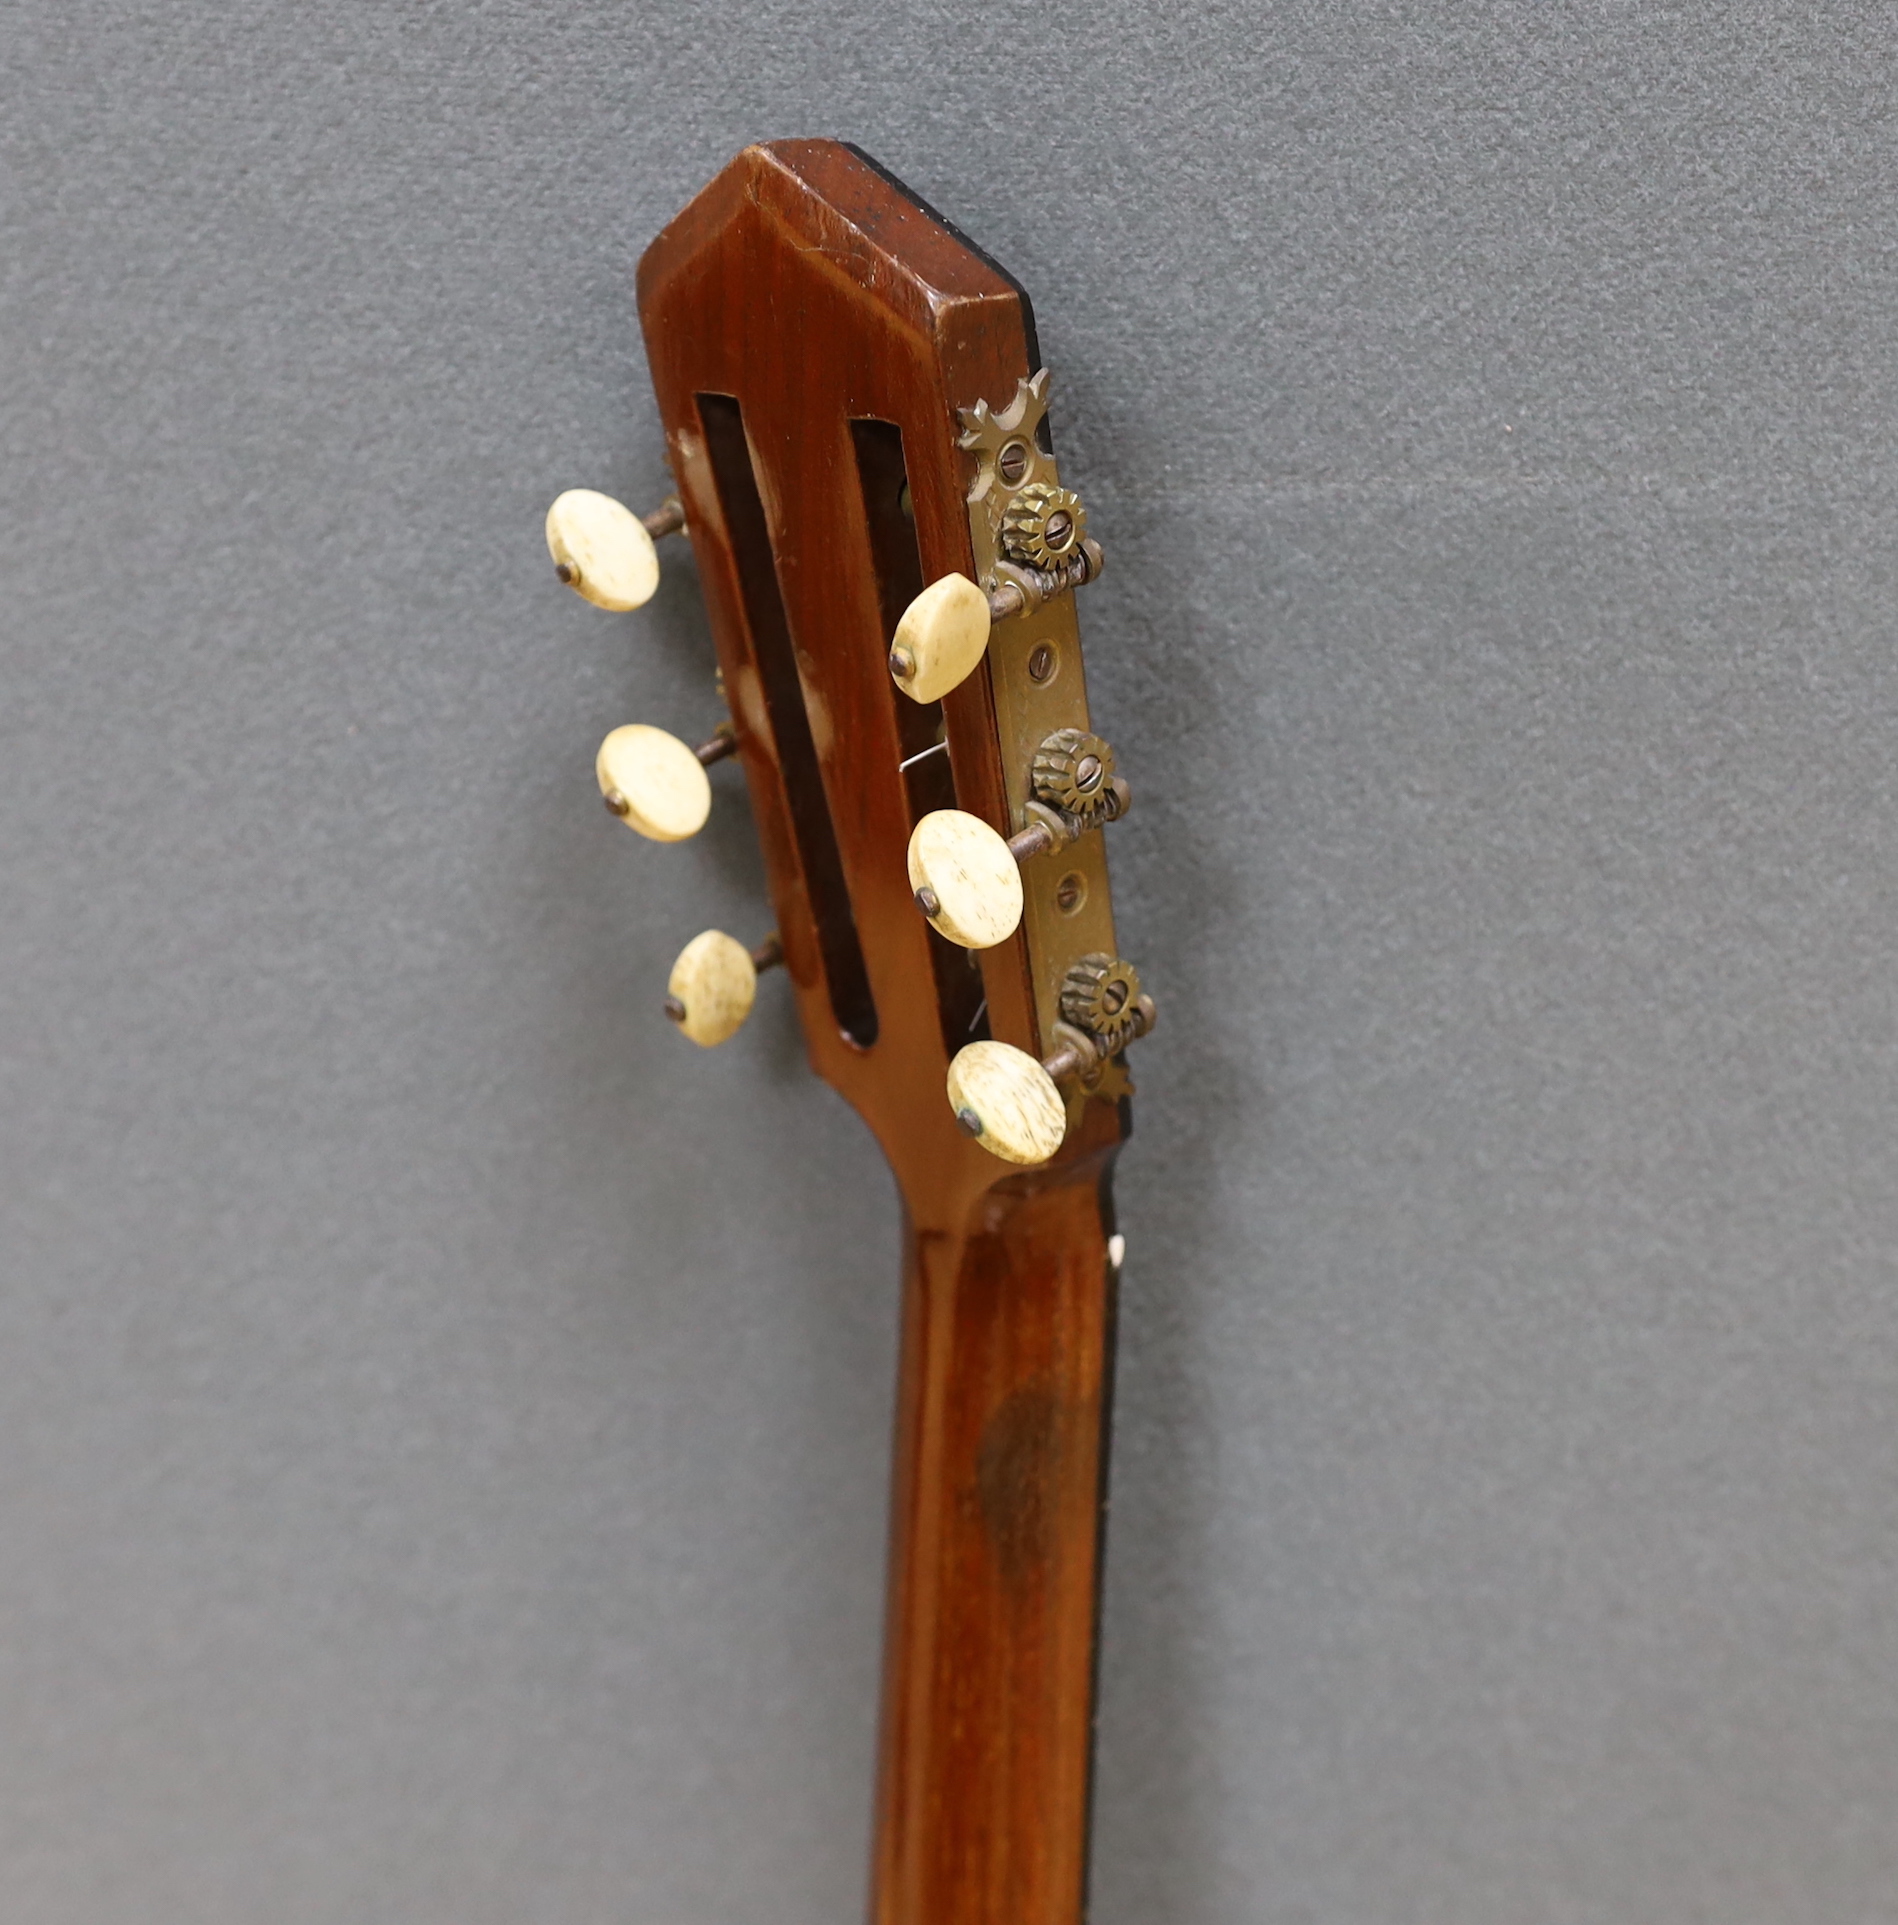 A six string banjo, unmarked, in a hard case by Ashbury